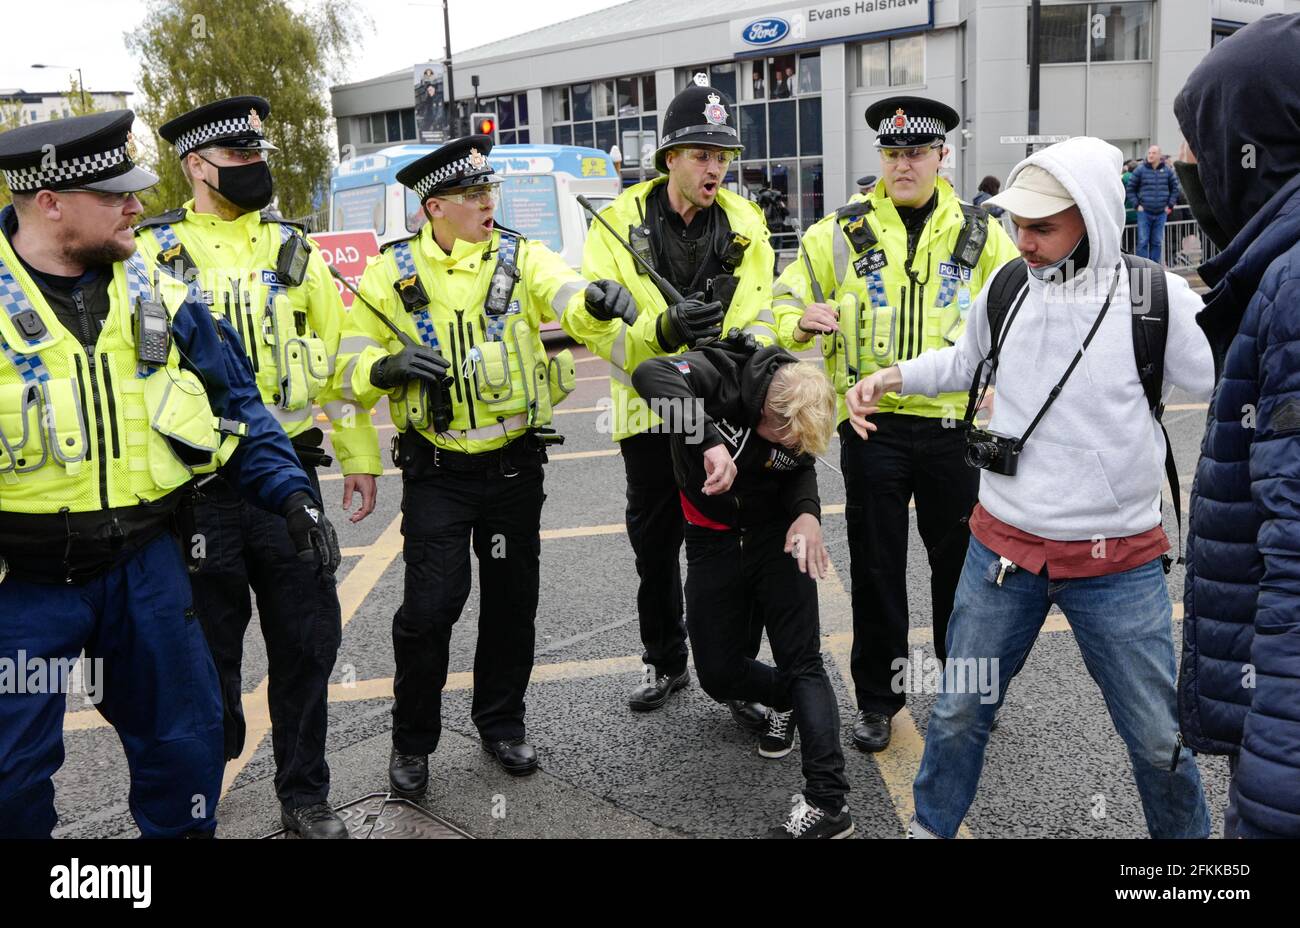 Manchester UK 2.May.2021 Manchester Utd Protests Match called off after unrest. Crowds dispersed by mounted police and Tactical aid units. Protest at Old Trafford. Protesters are rallying against owners.Manchester United fans are Anti Glazers the American owners. Credit: GARY ROBERTS/Alamy Live News Stock Photo